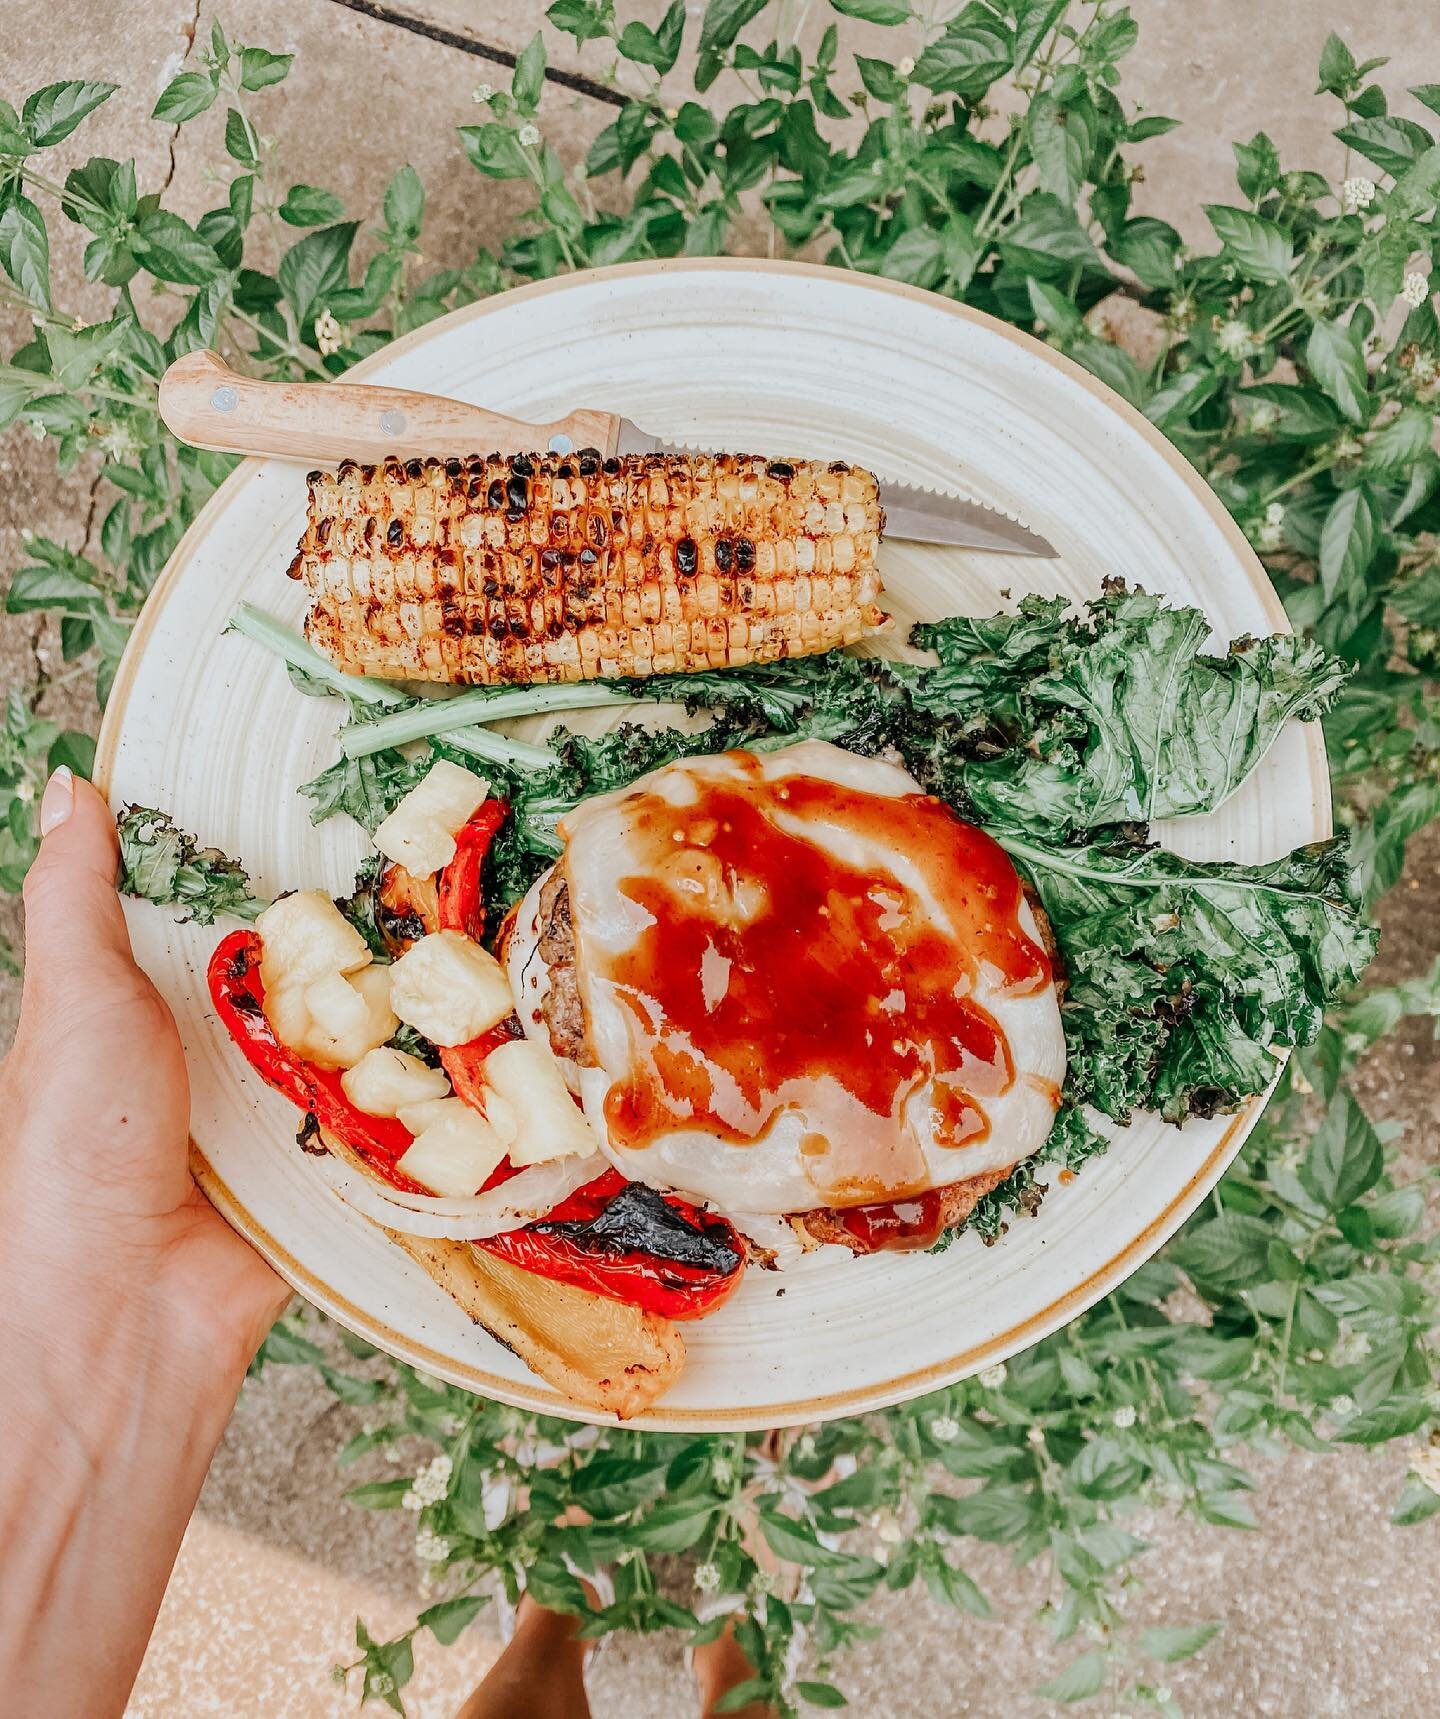 The only pic I managed to get all weekend 🙃🙃 all the summer veggies grilled with one of my dads burgers &mdash; yummmm #betternotcomplicated #livwelldaily #fivethrive #restanddigest